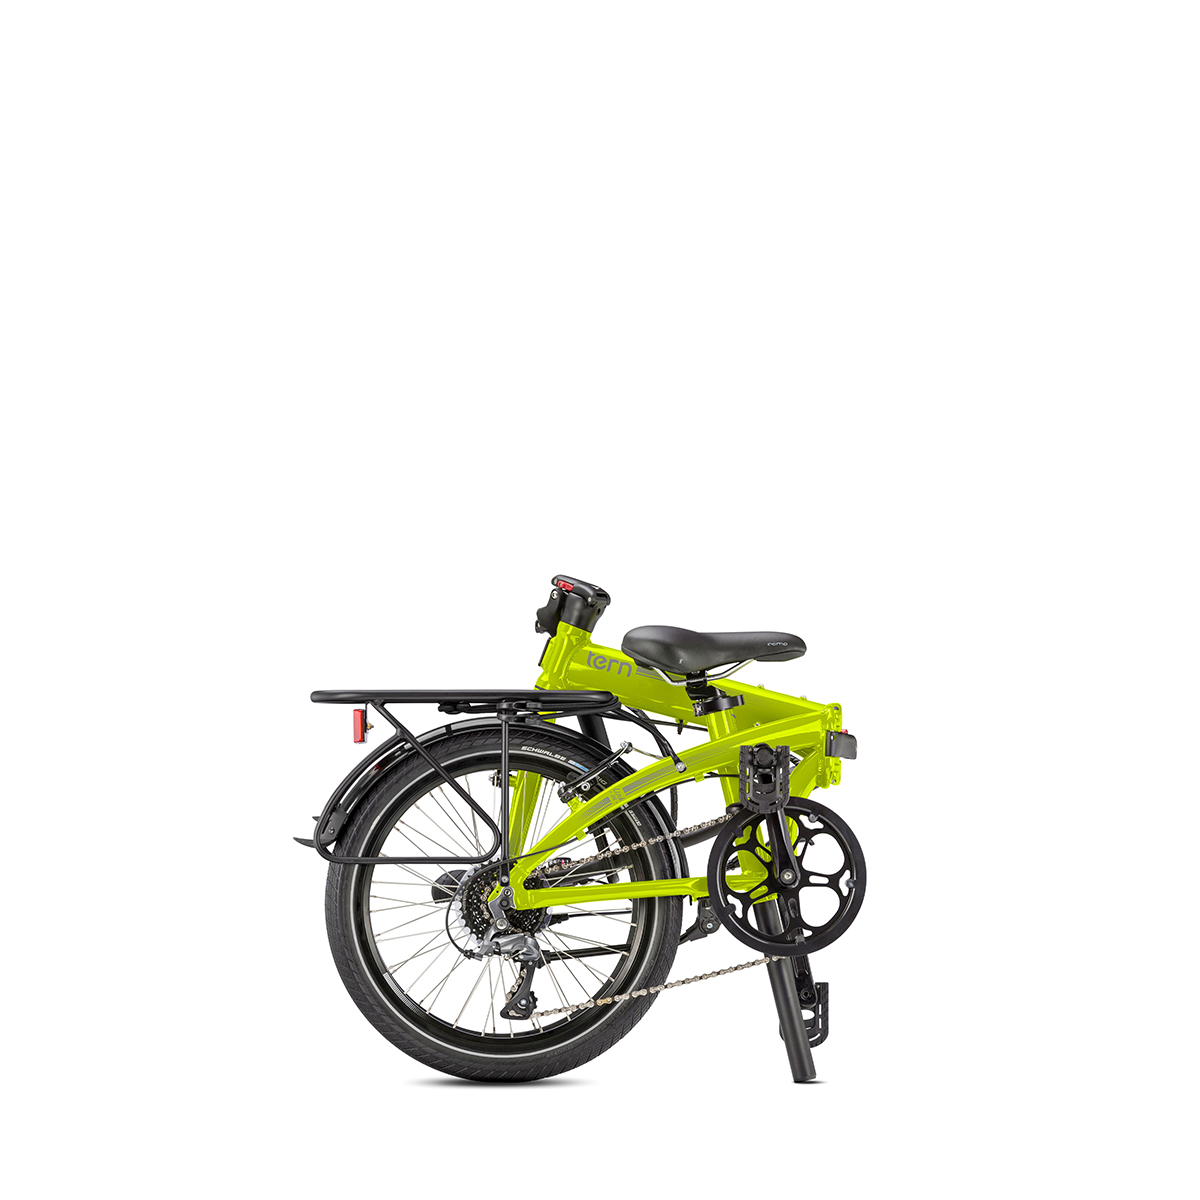 Bicicleta Tern Link R20 8 Velocidades,  image number null